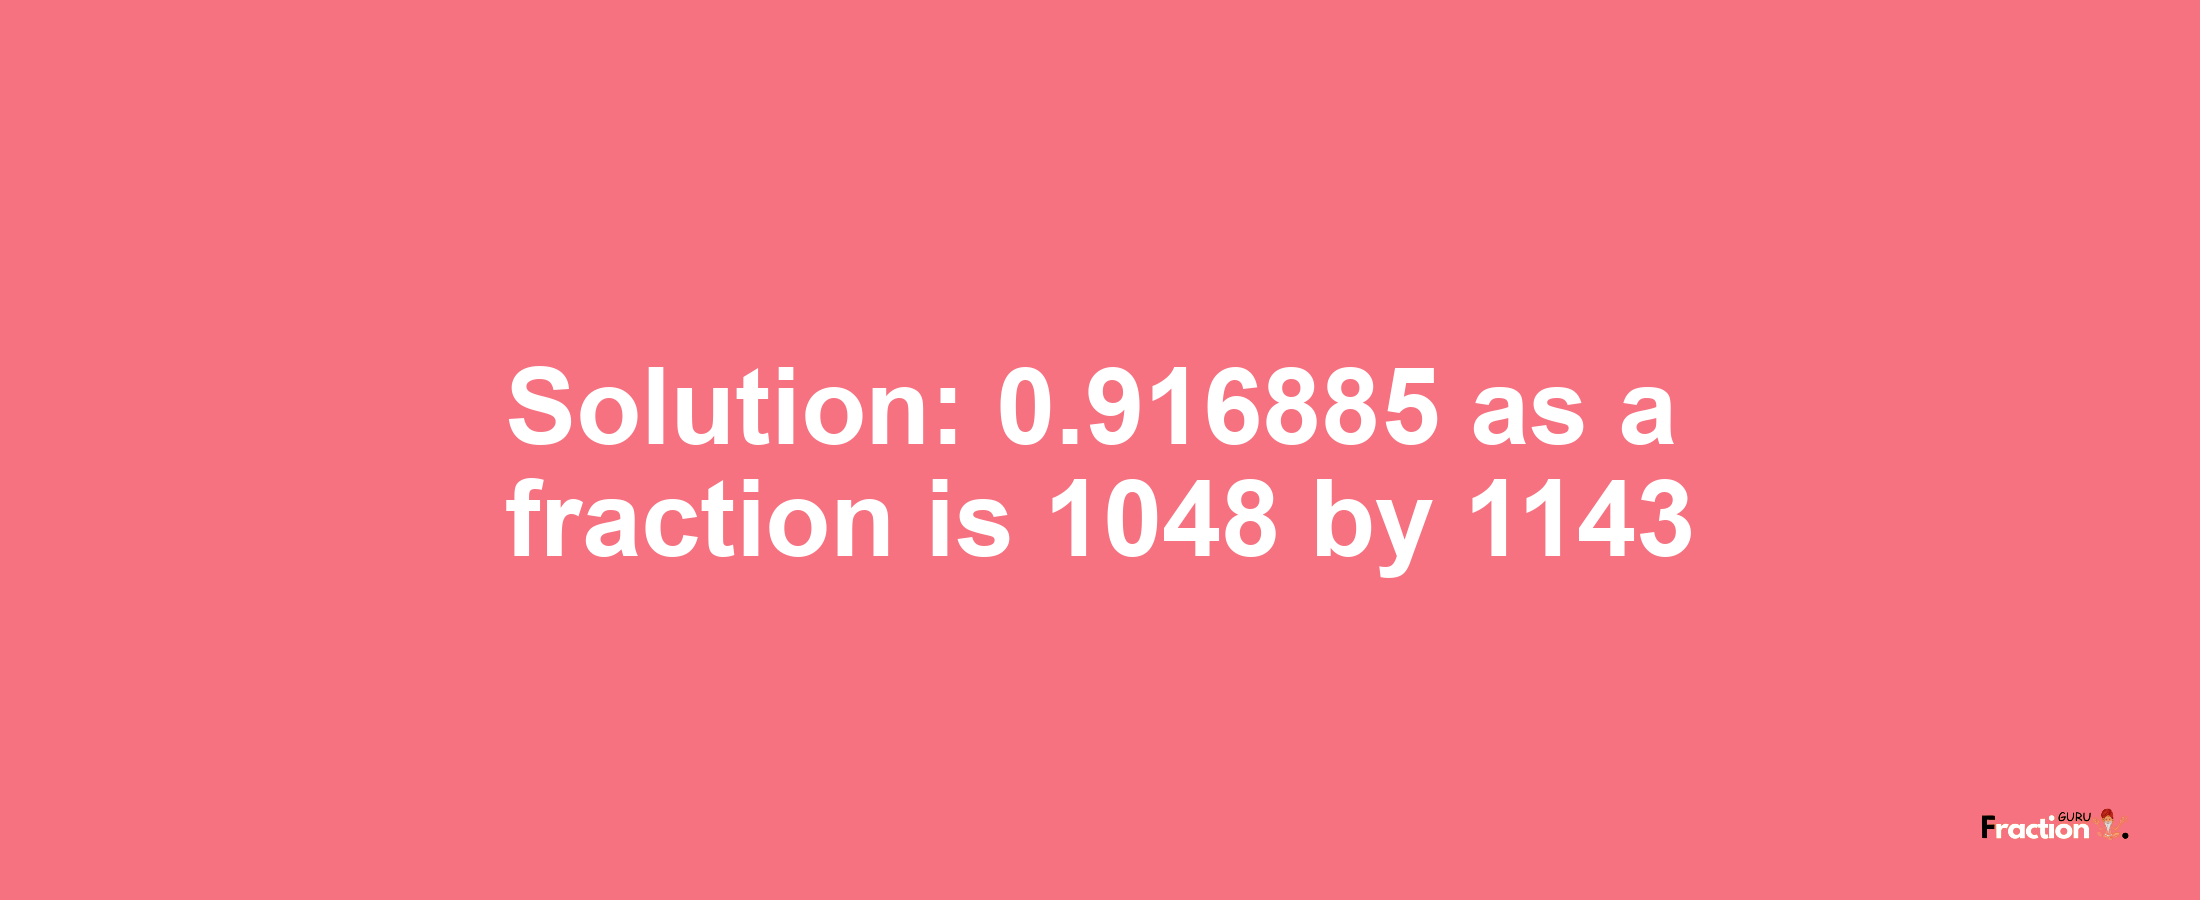 Solution:0.916885 as a fraction is 1048/1143